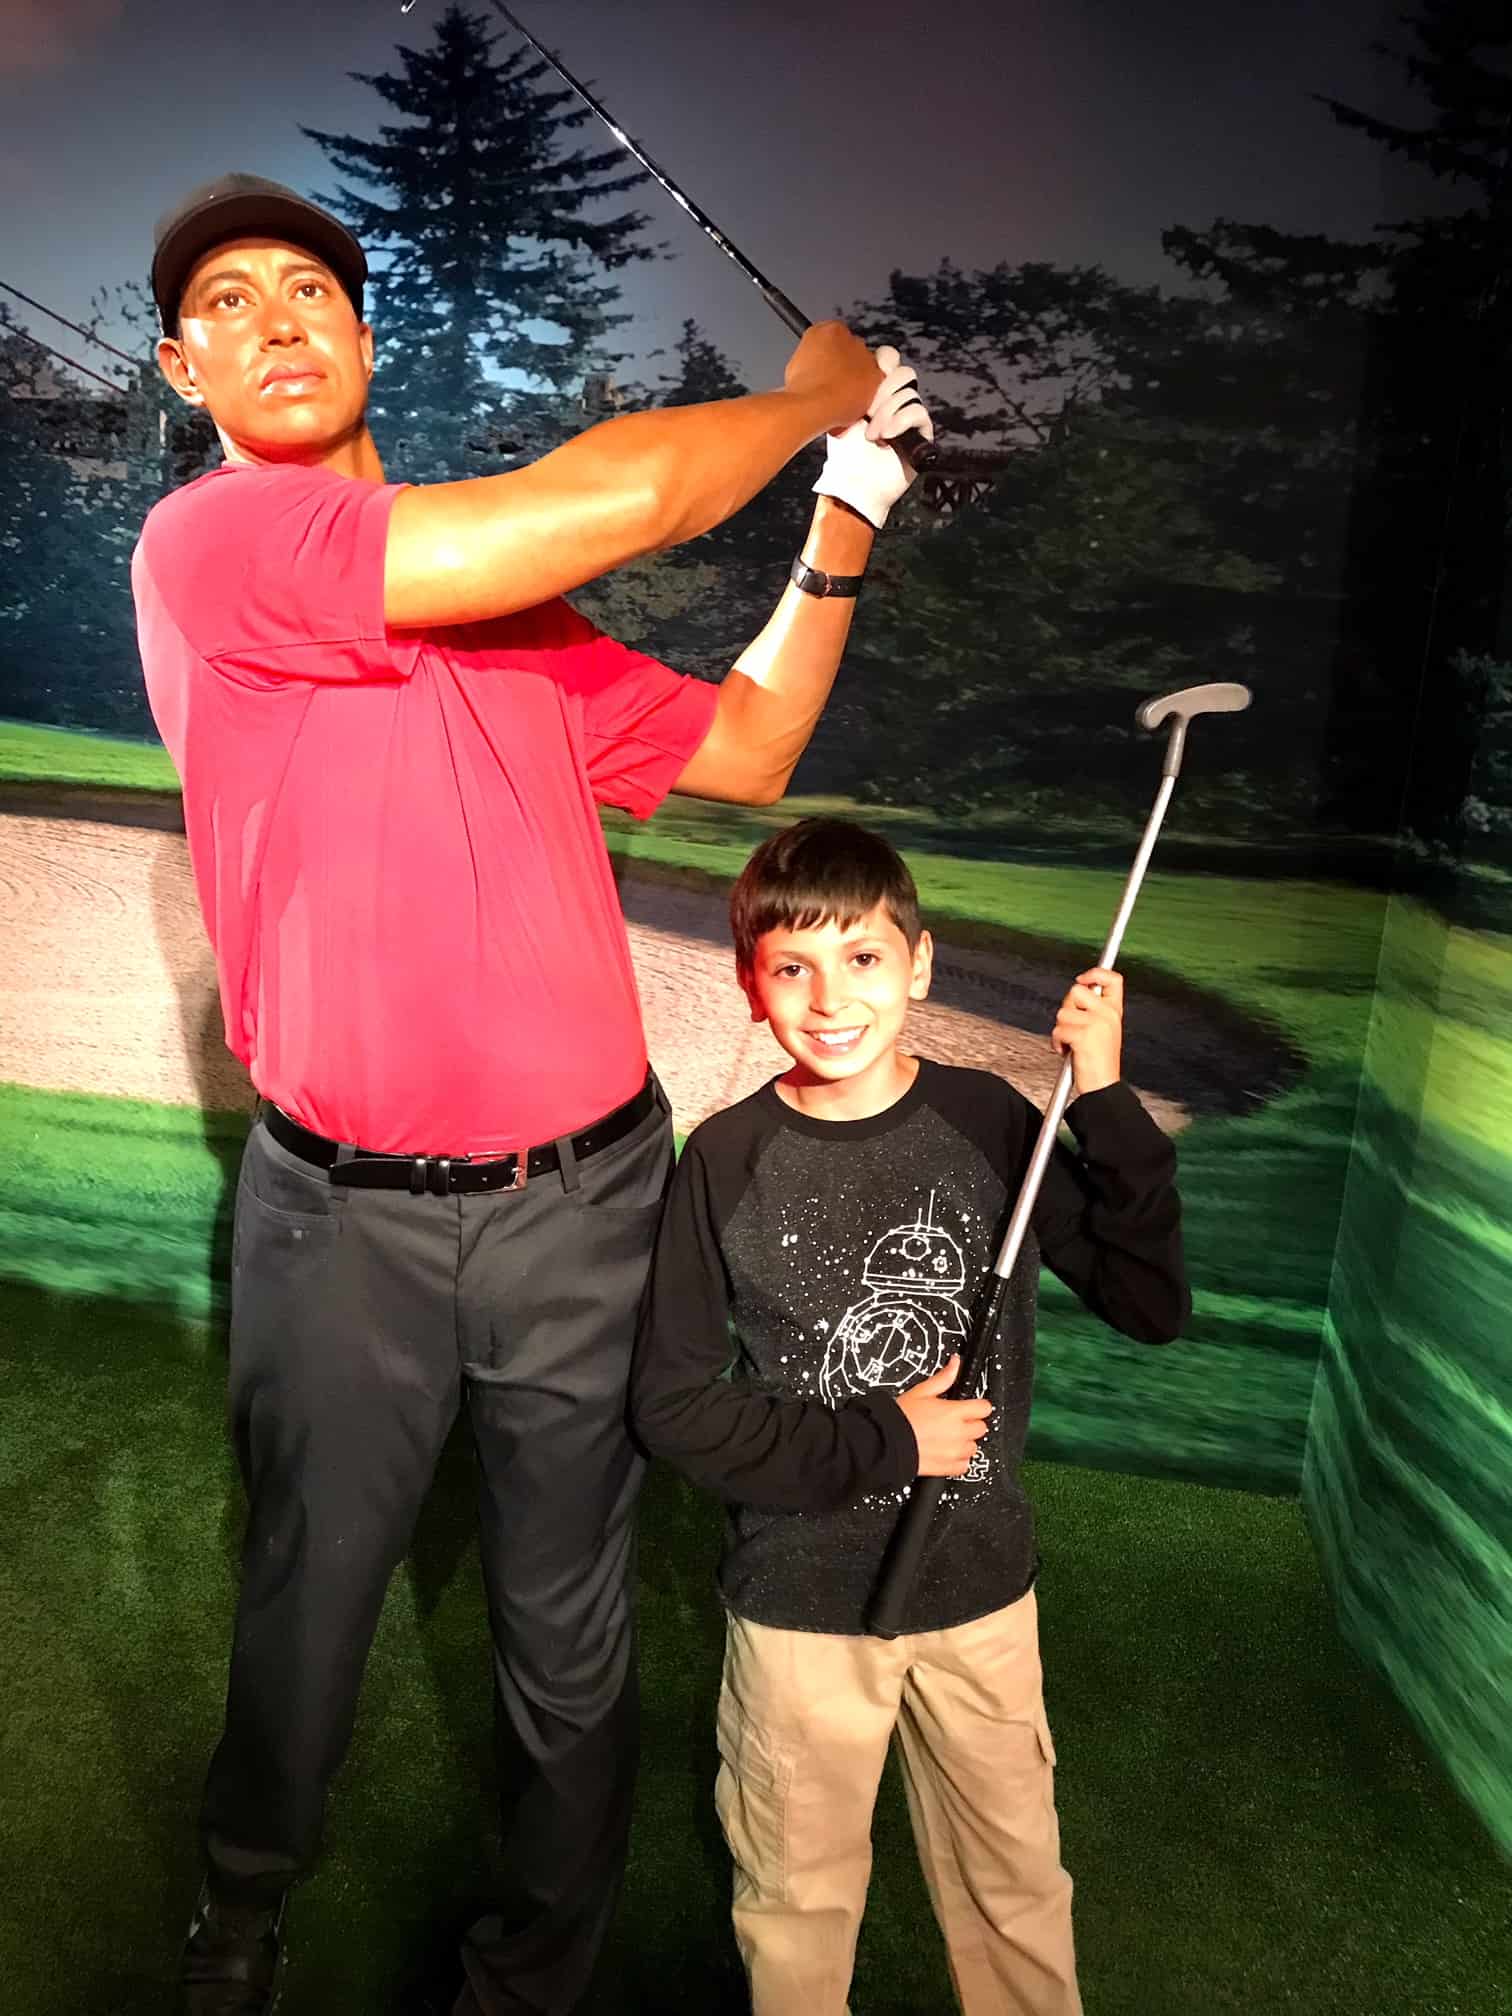 Tiger Woods wax museum Jake family fun bay area